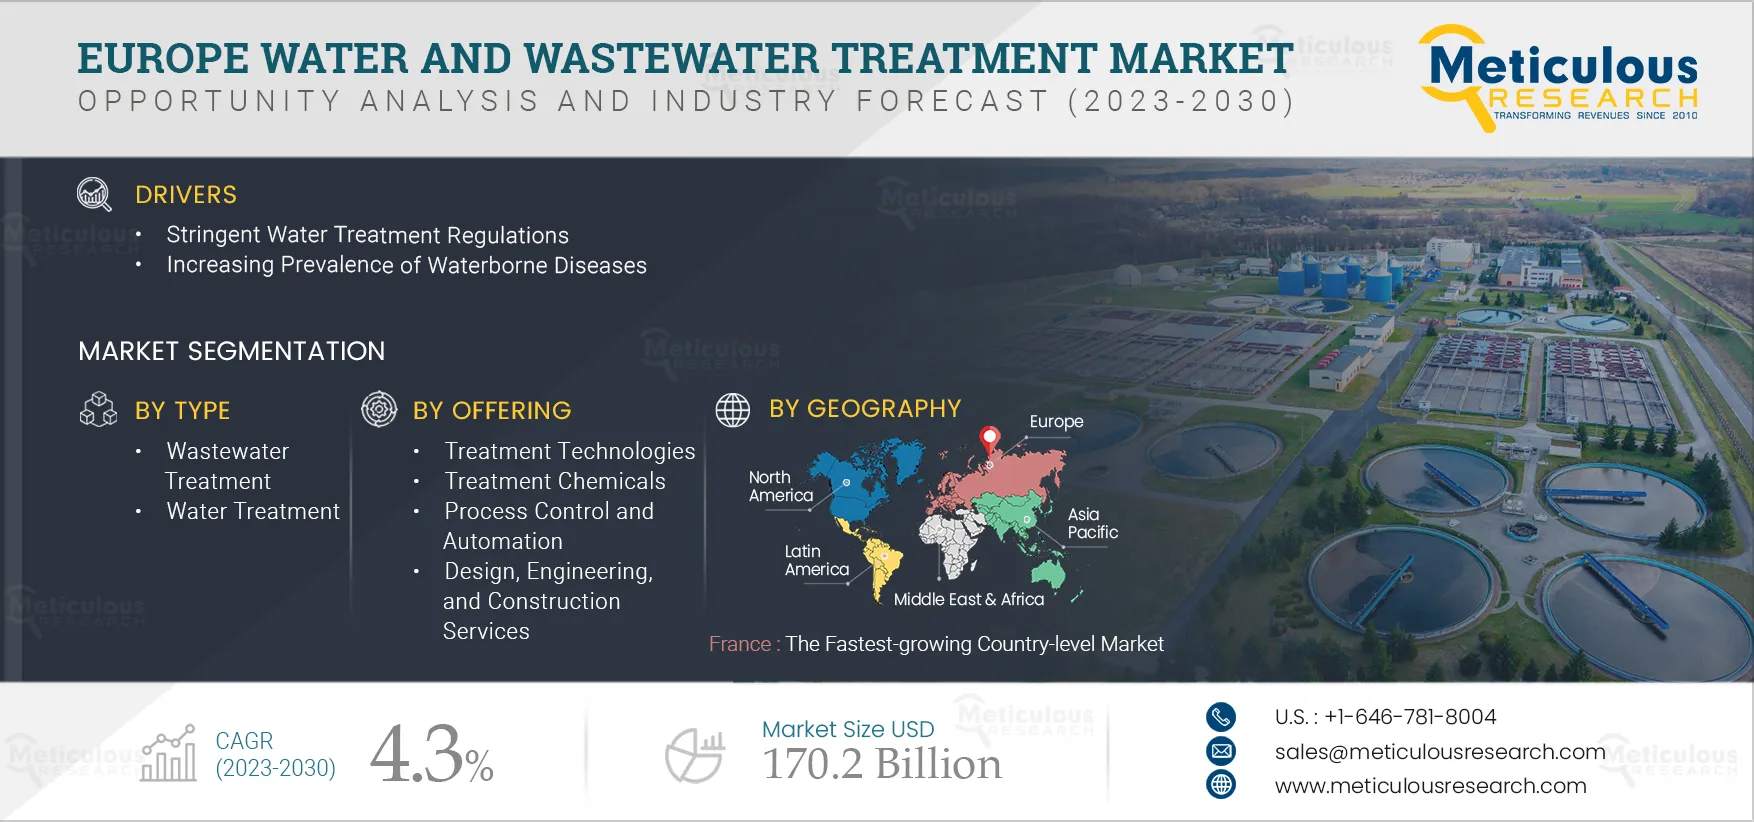 Europe Water and Wastewater Treatment Market